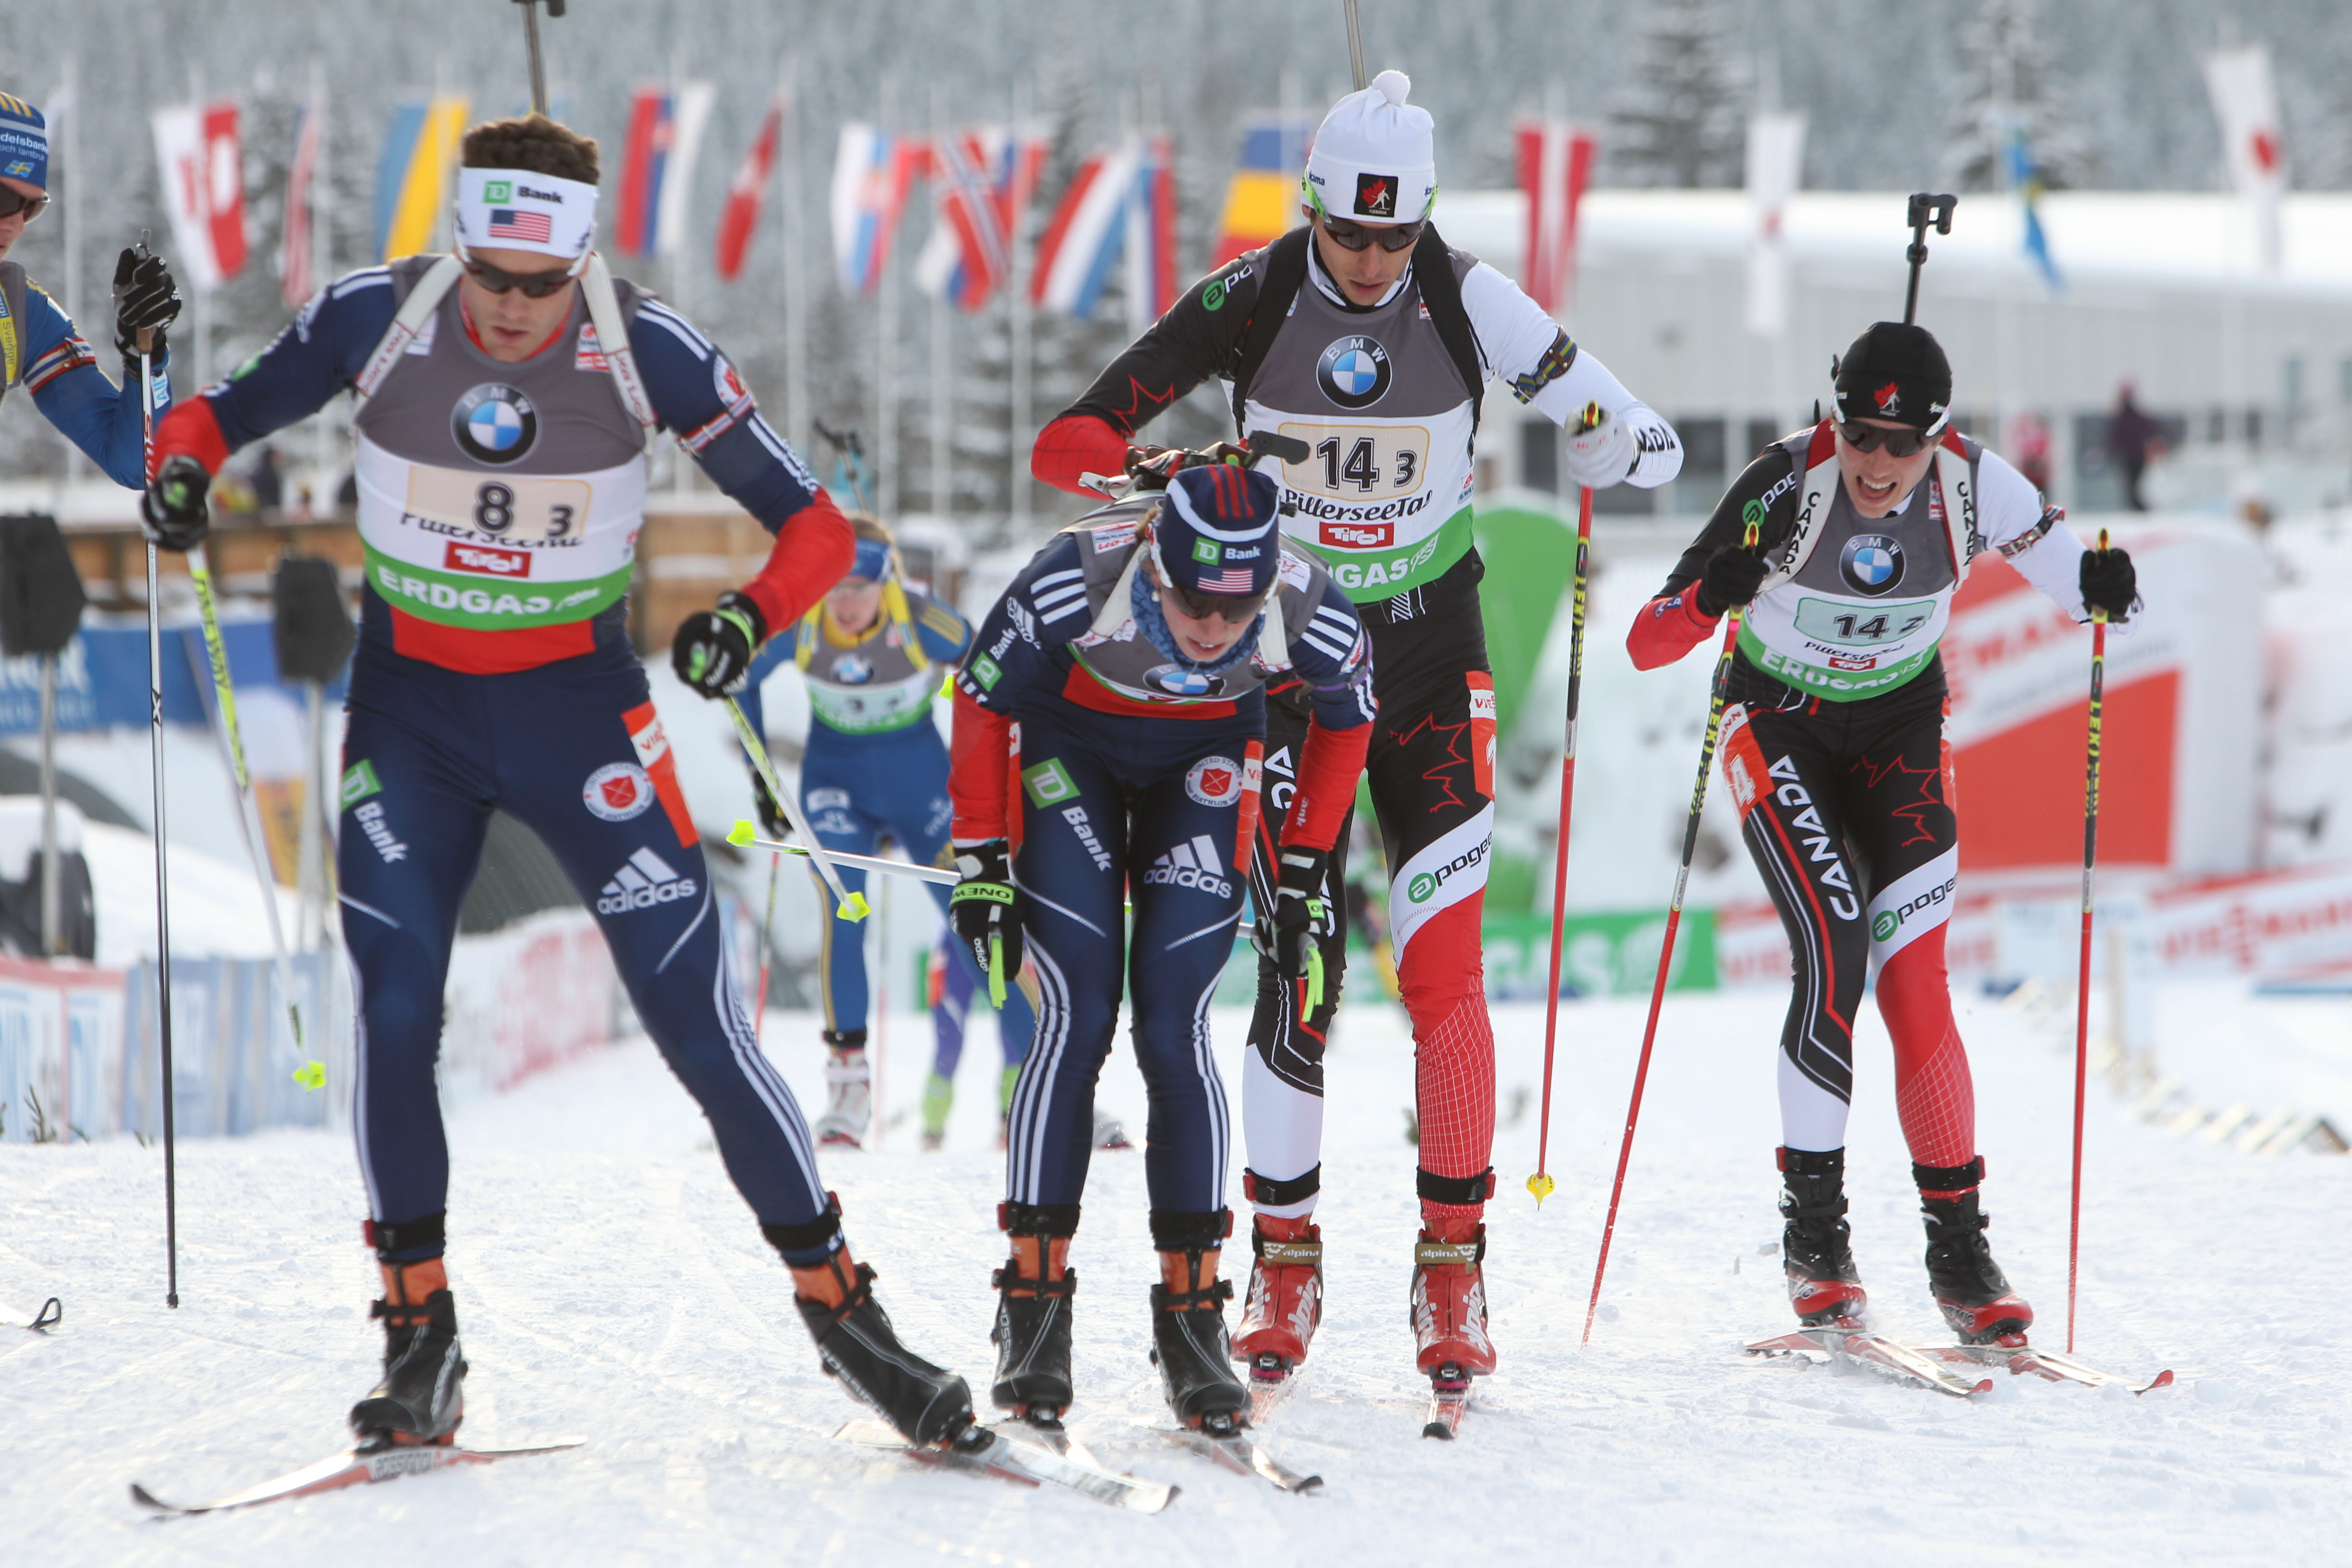 Biathletes Finish World Cup Period I With Mixed Relay, Russia Dominates